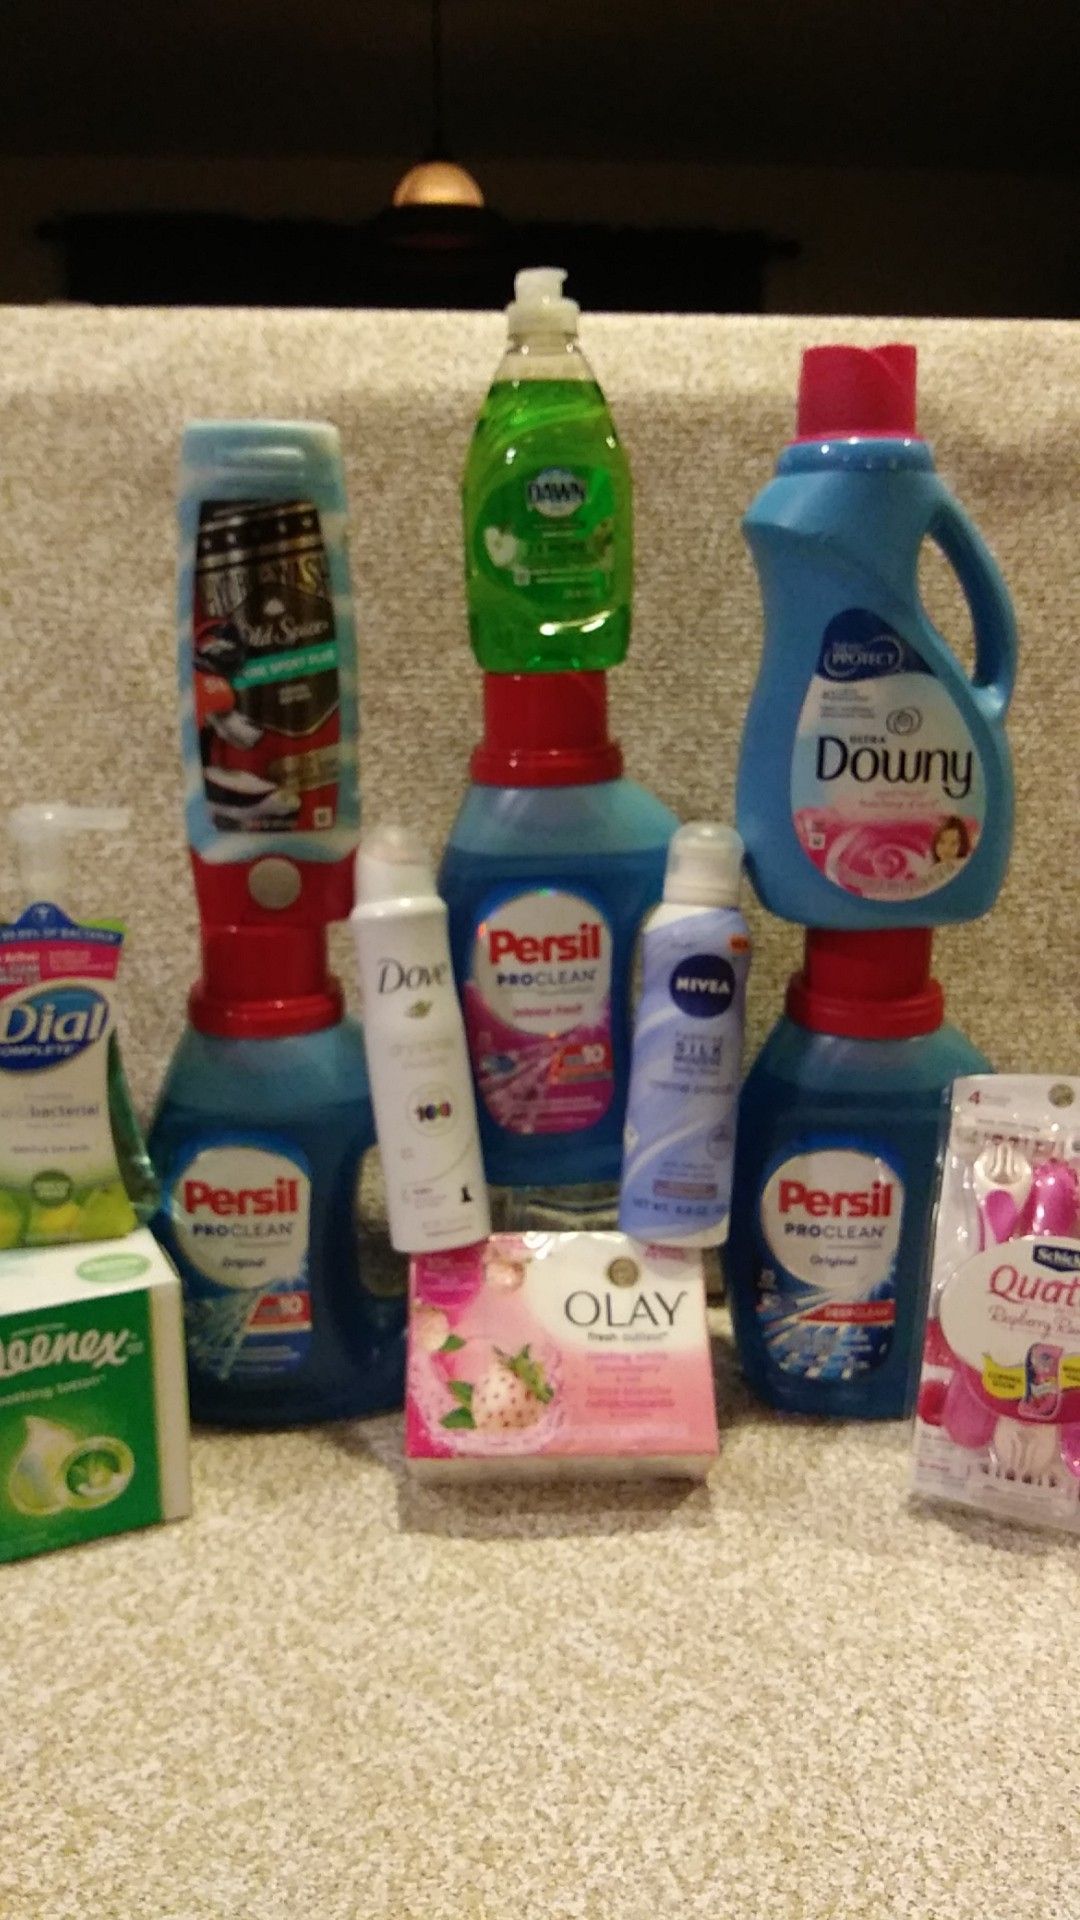 💙3 LAUNDRY DETERGENTS,Fabric Softener, Olay Outlast, Old Spice- Pure Sport, DOVE & MORE!👍